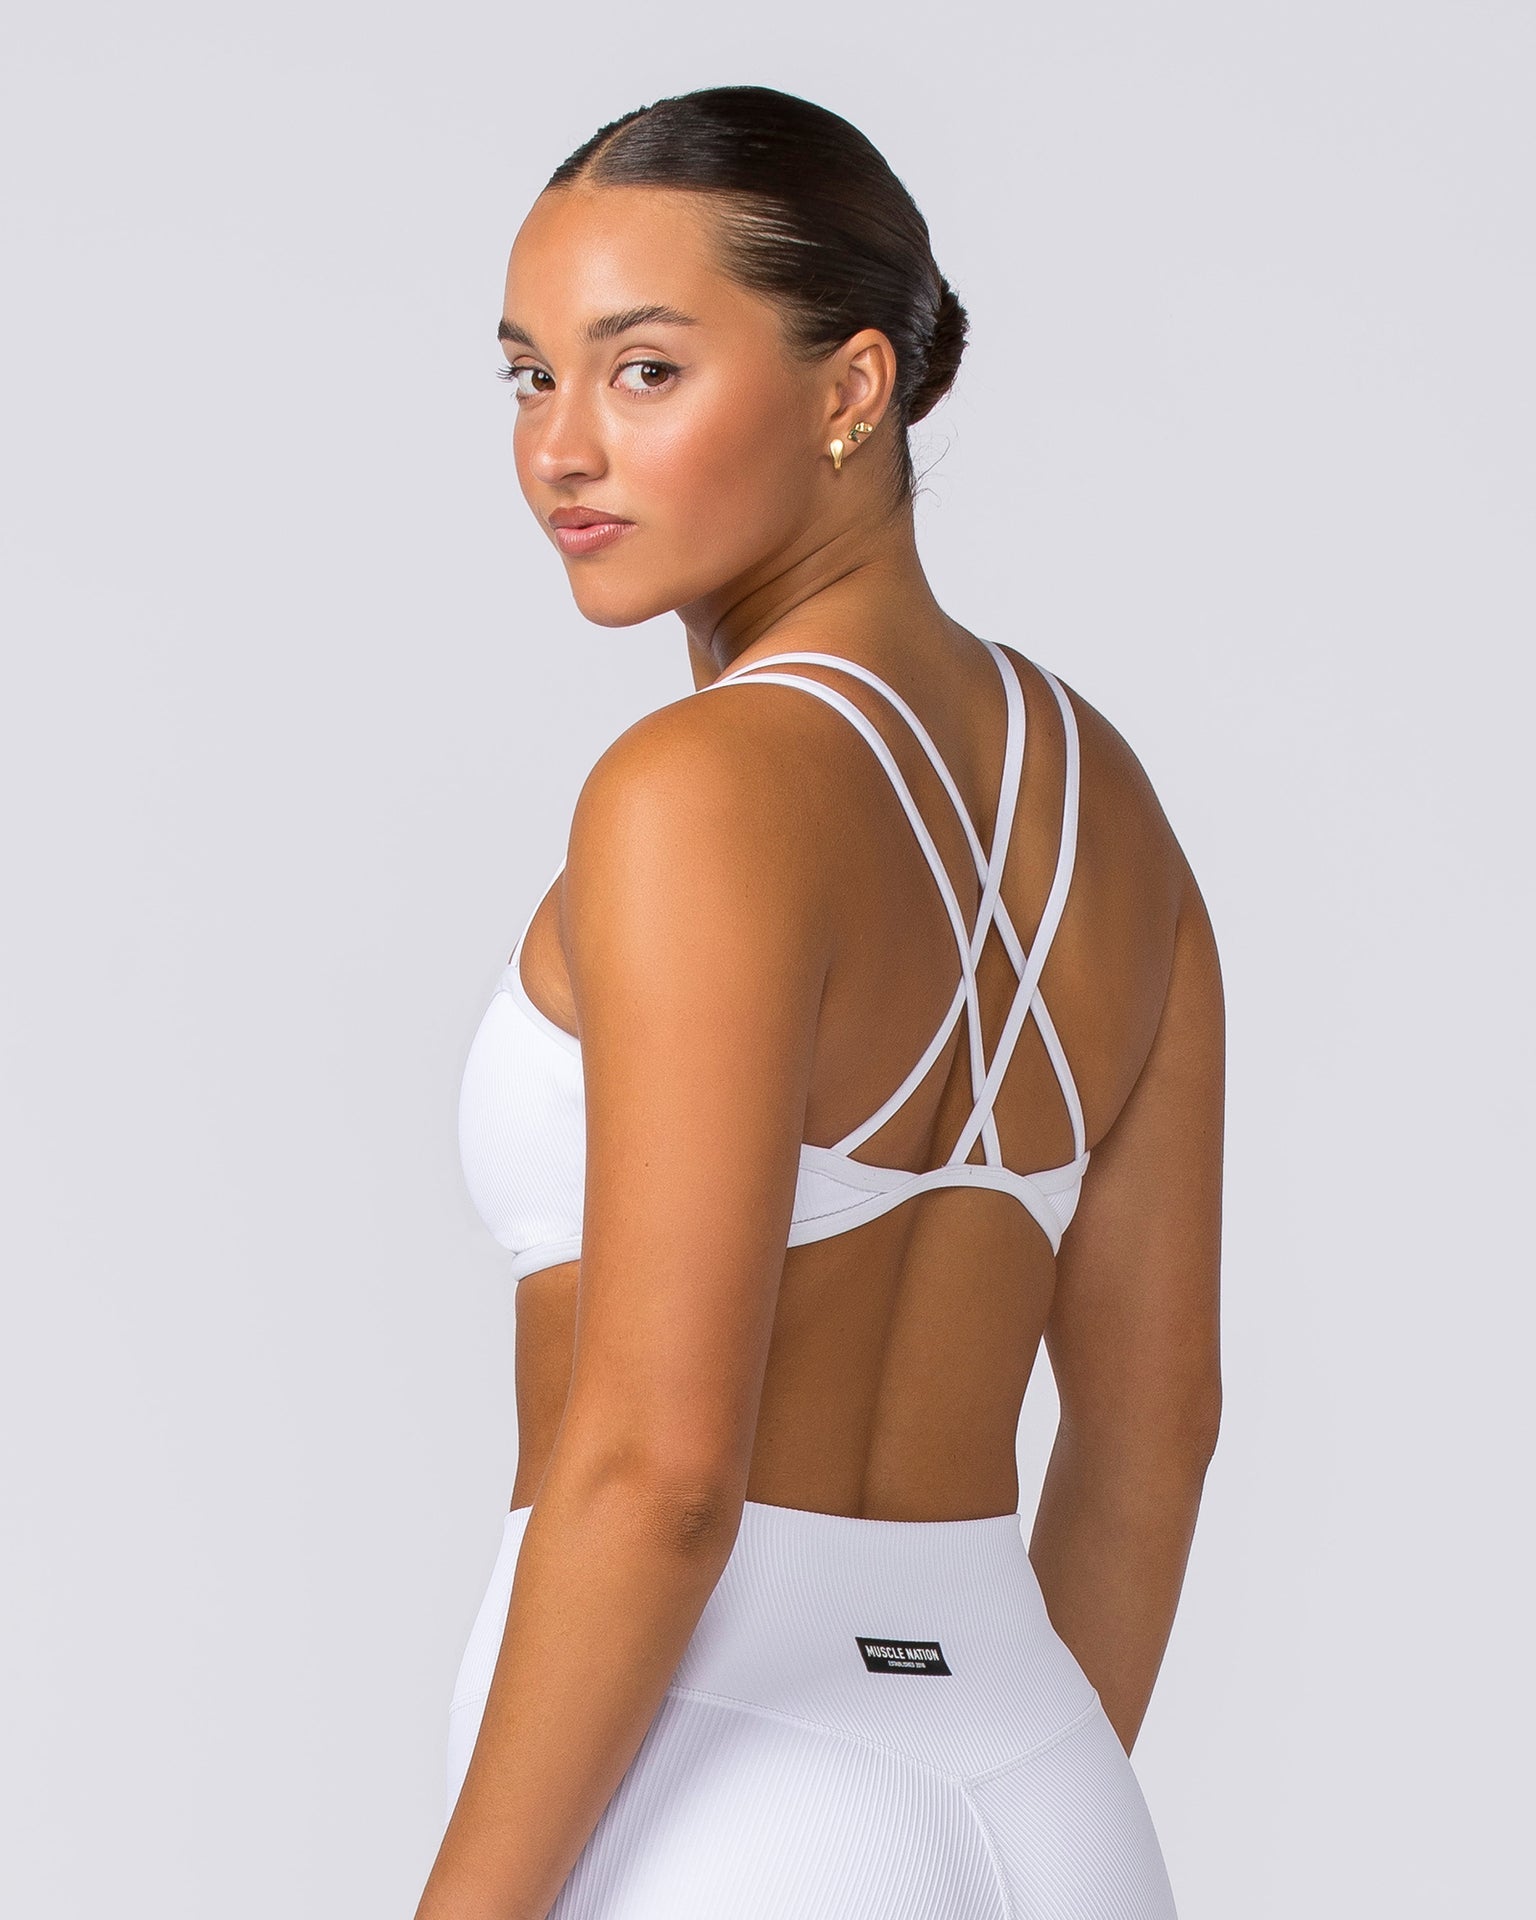 Muscle Nation Sports Bras Curves Rib Bralette - White